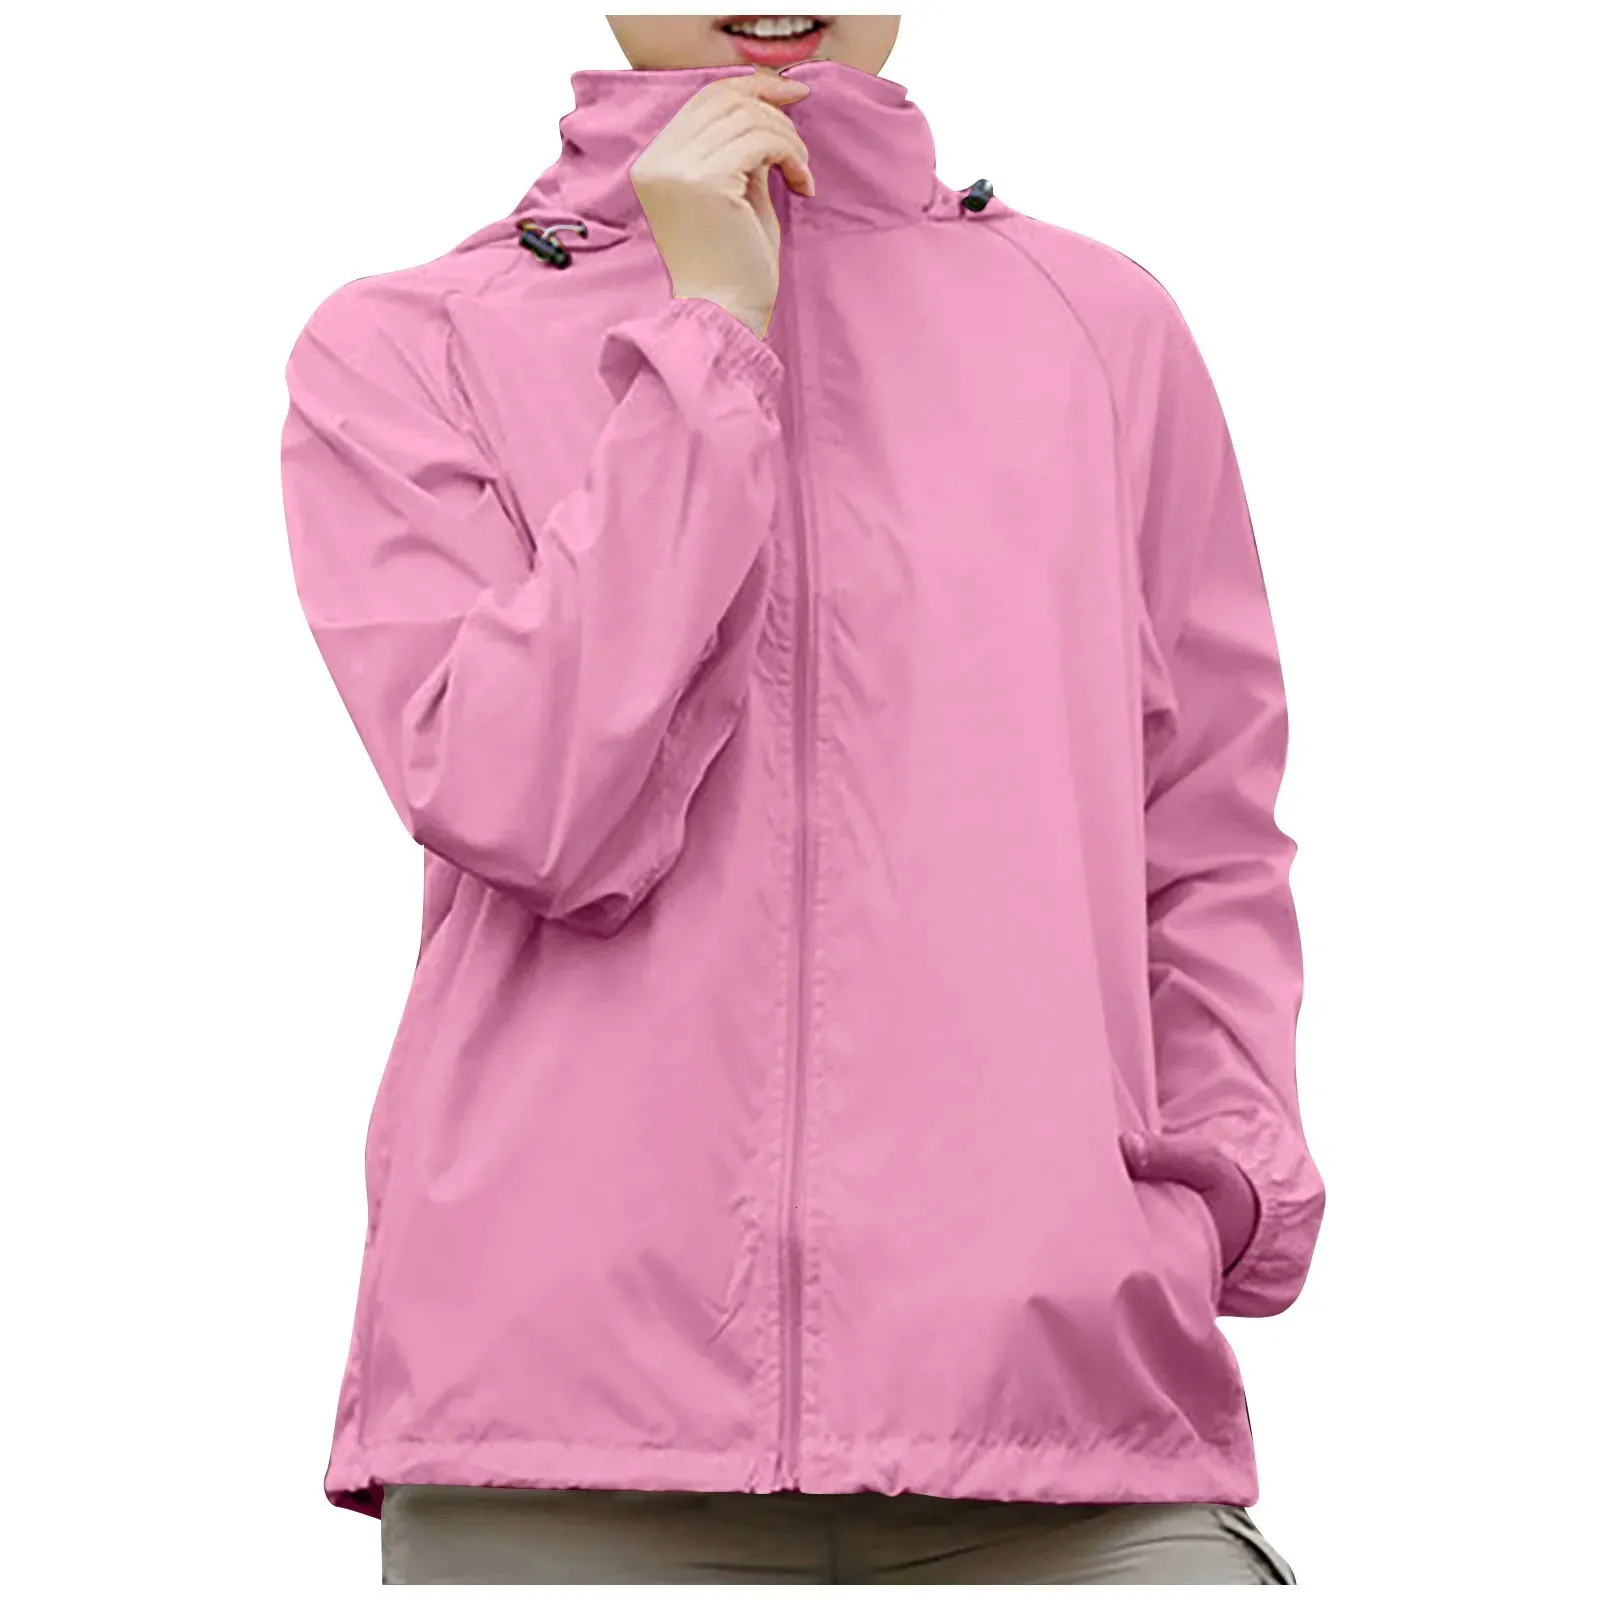 Female Clothing WomenS Solid Colored Hooded Long Sleeved Jacket Wind Breaker Sun Protection Outdoor Sports 240305